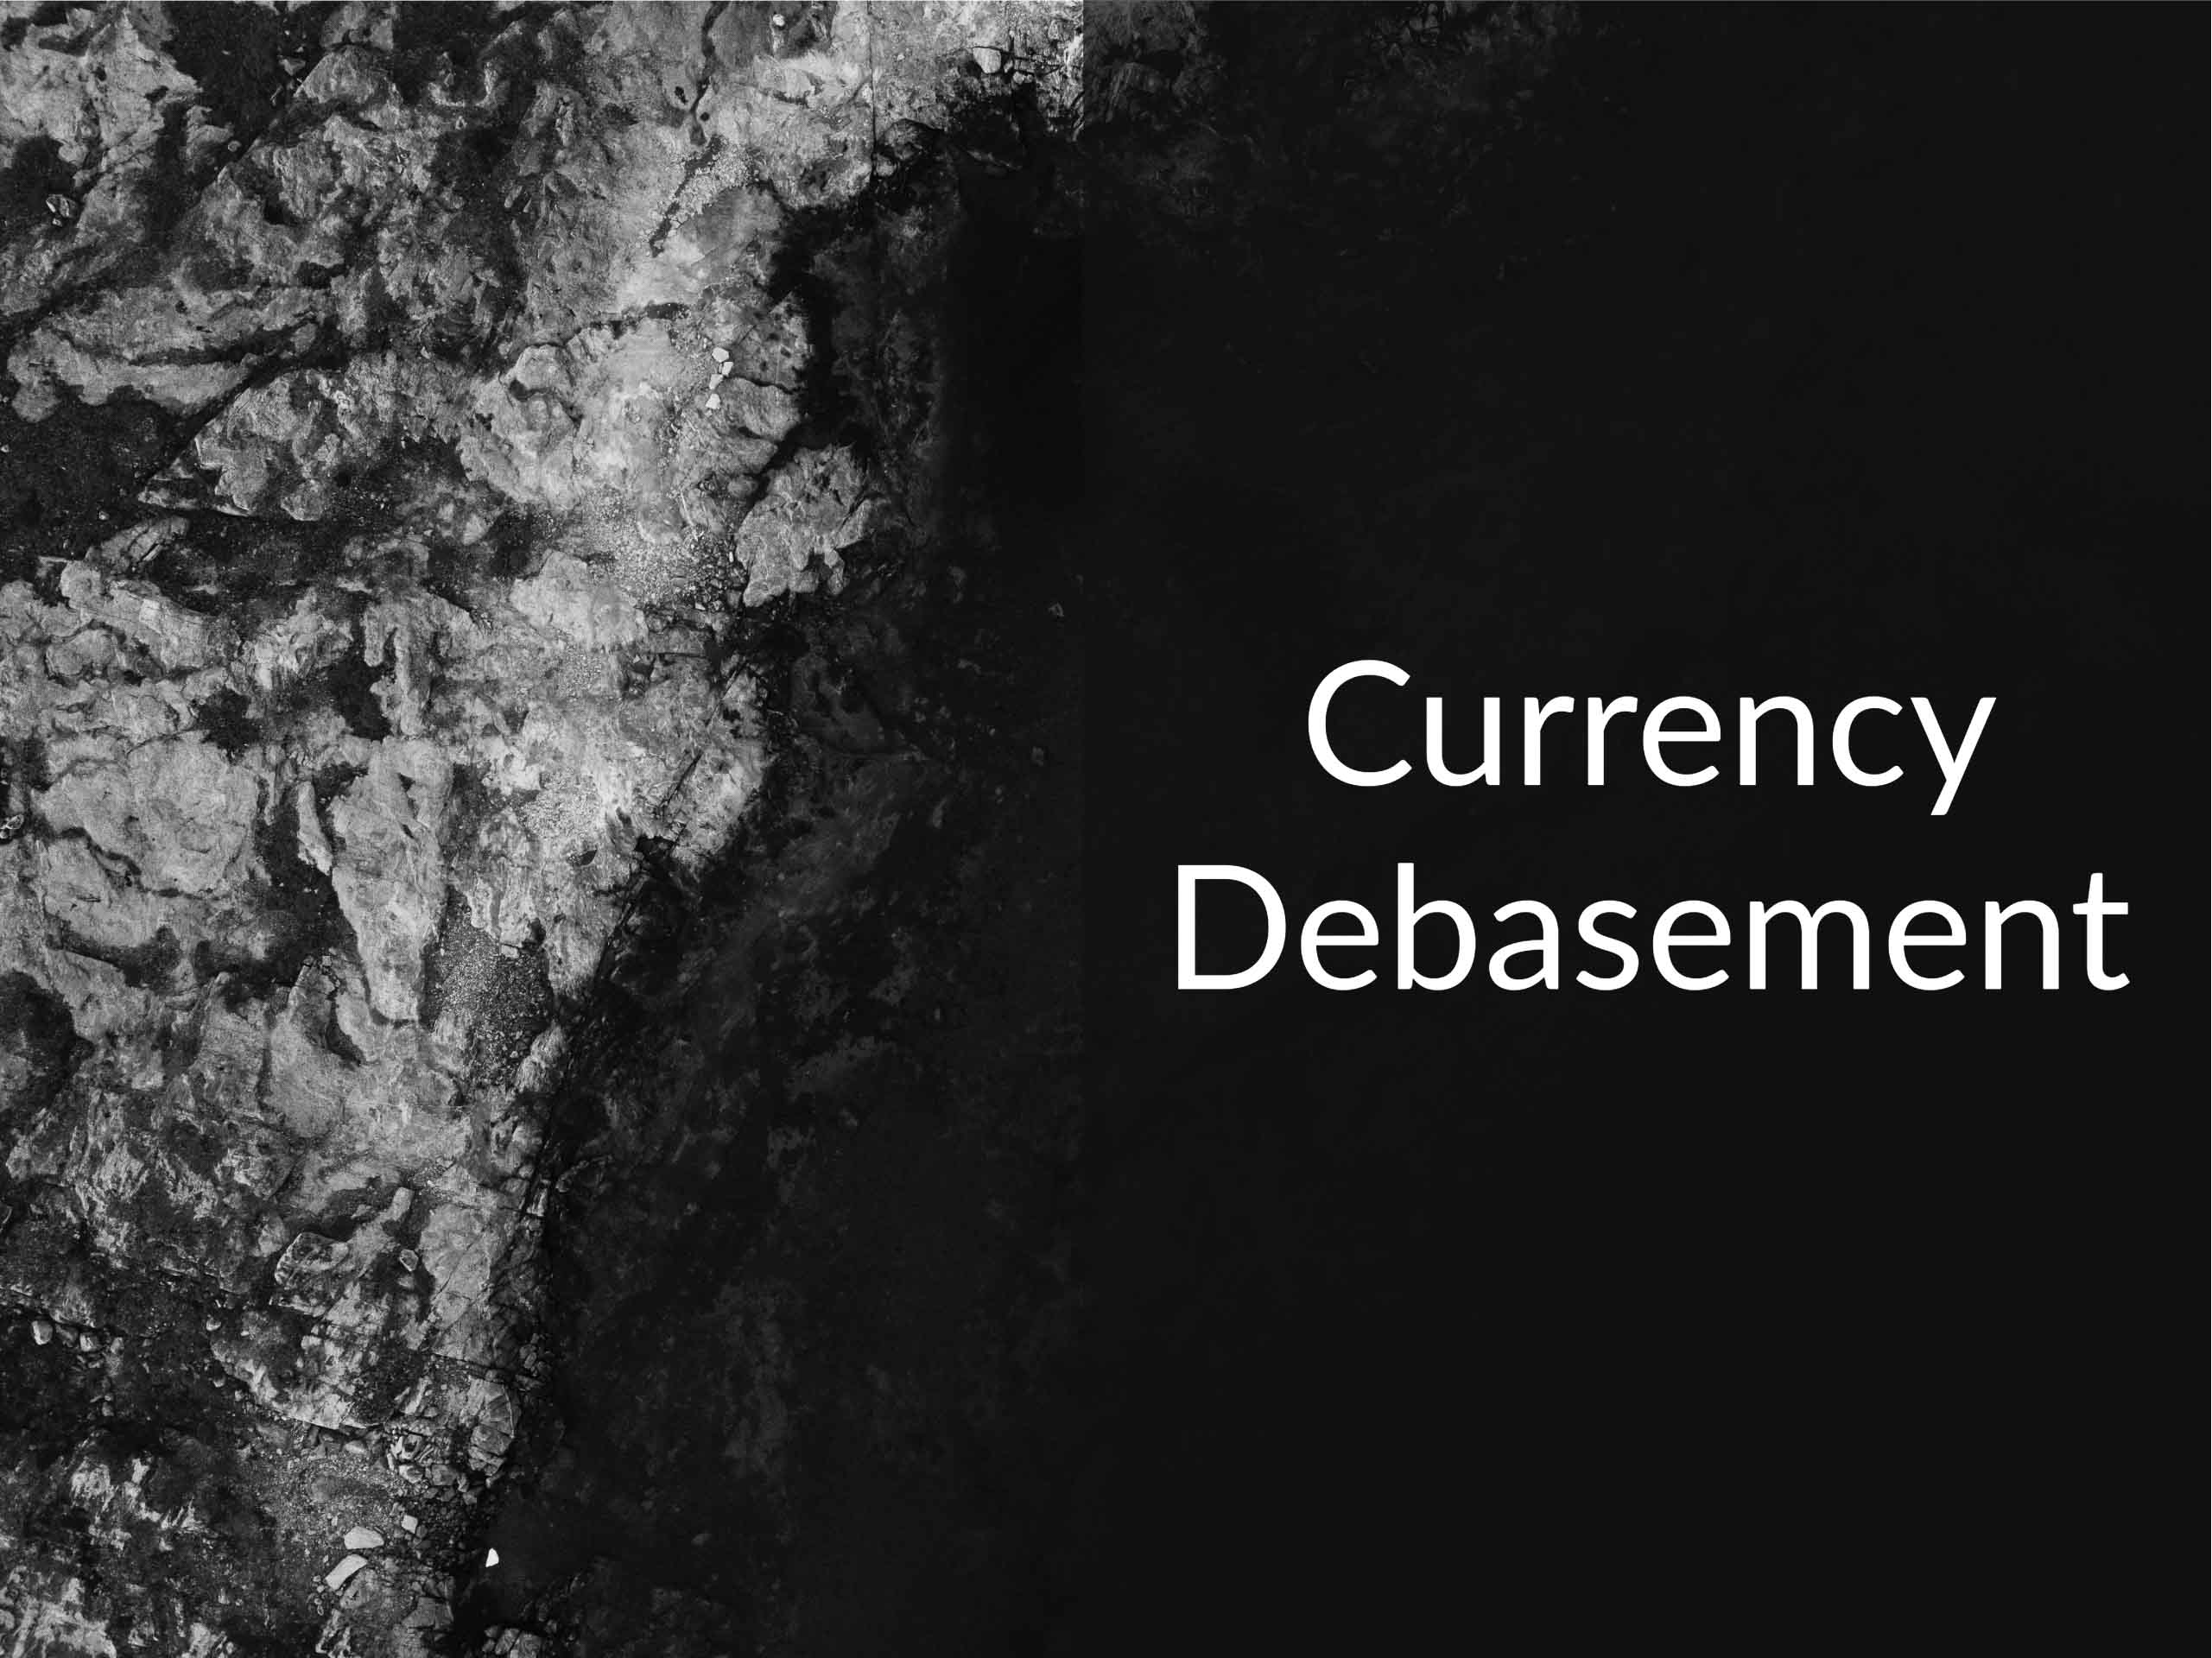 475: Inflation’s Illusion: Debunking the Normalcy of Currency Debasement